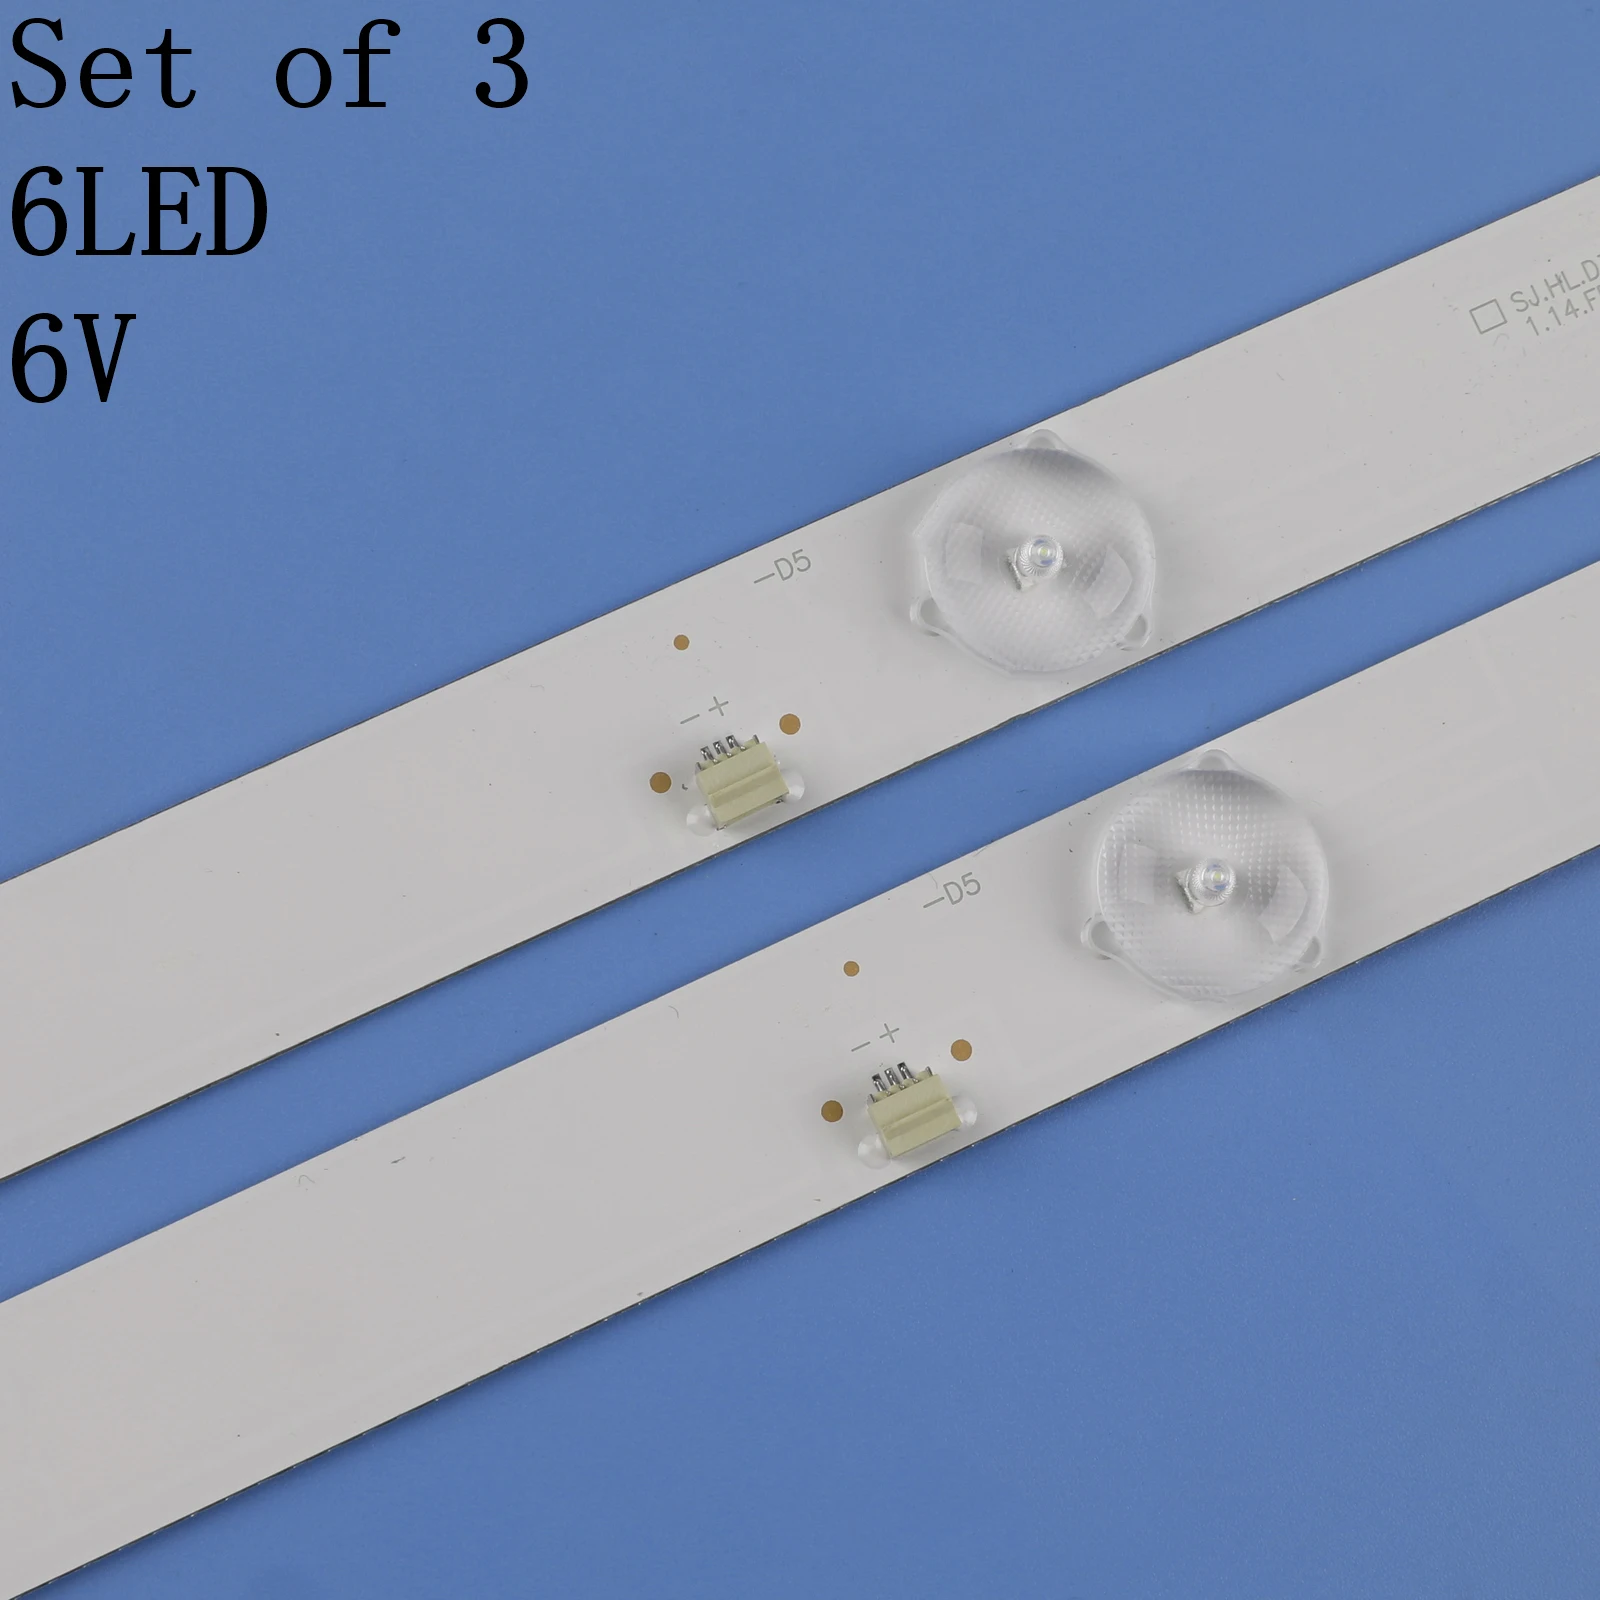 NEW 1set=3 pieces HD32-D2 led backlight for 32inch HD32-D2 RH43-D3202X-06A-JF JL.D32061235-017IS-F 6leds